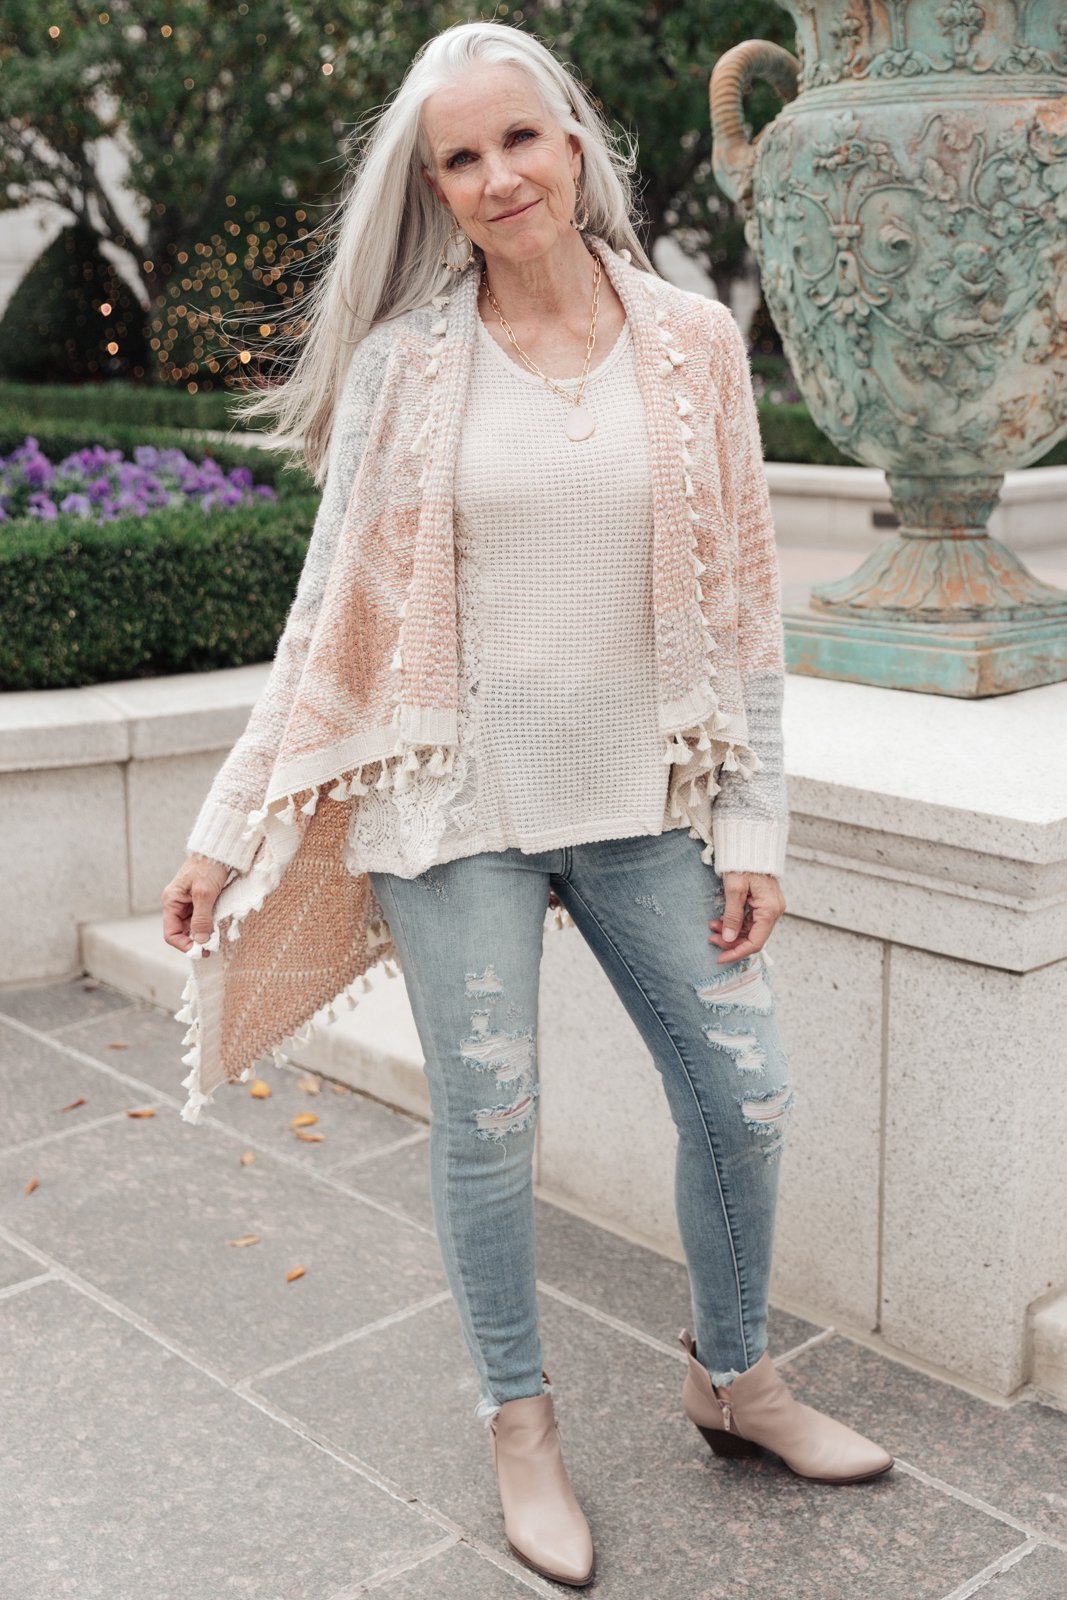 Lined with Tassel Cardigan in Mauve/Blue (Online Exclusive)